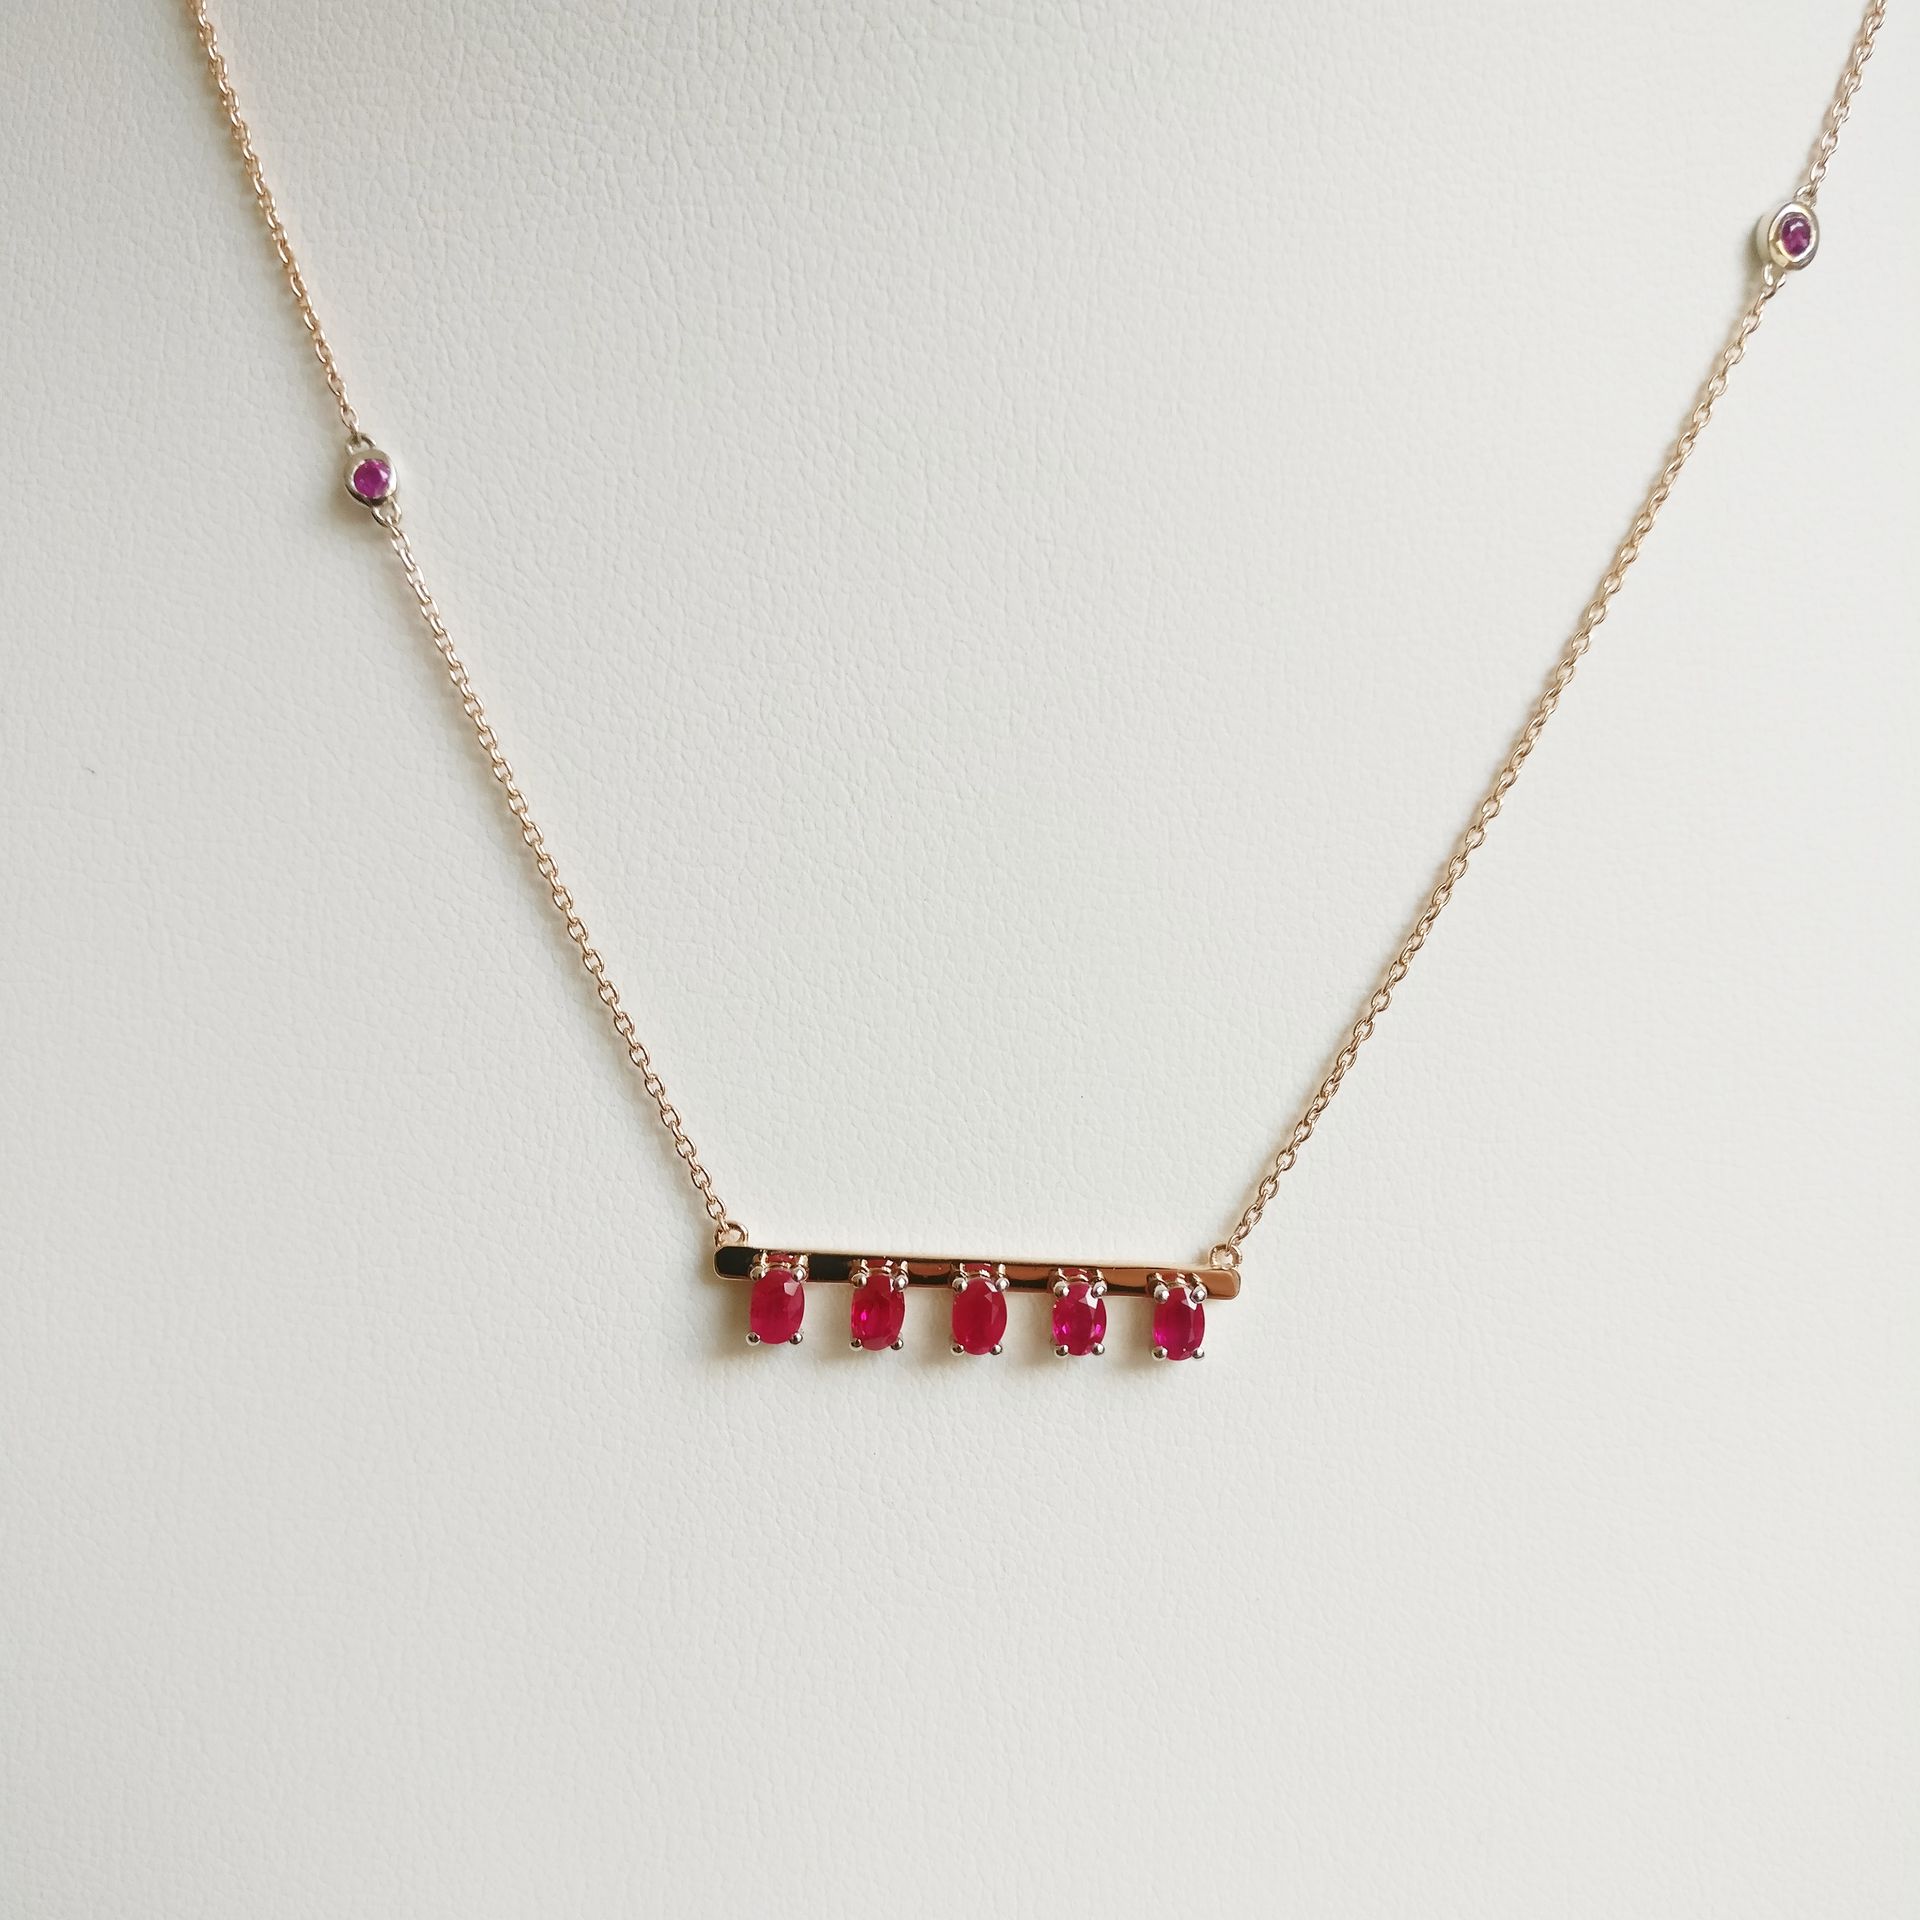 Ruby Necklace with Pendant 1.15ct Ruby Necklace with Pendant
- Material: 18 kt. &hellip;